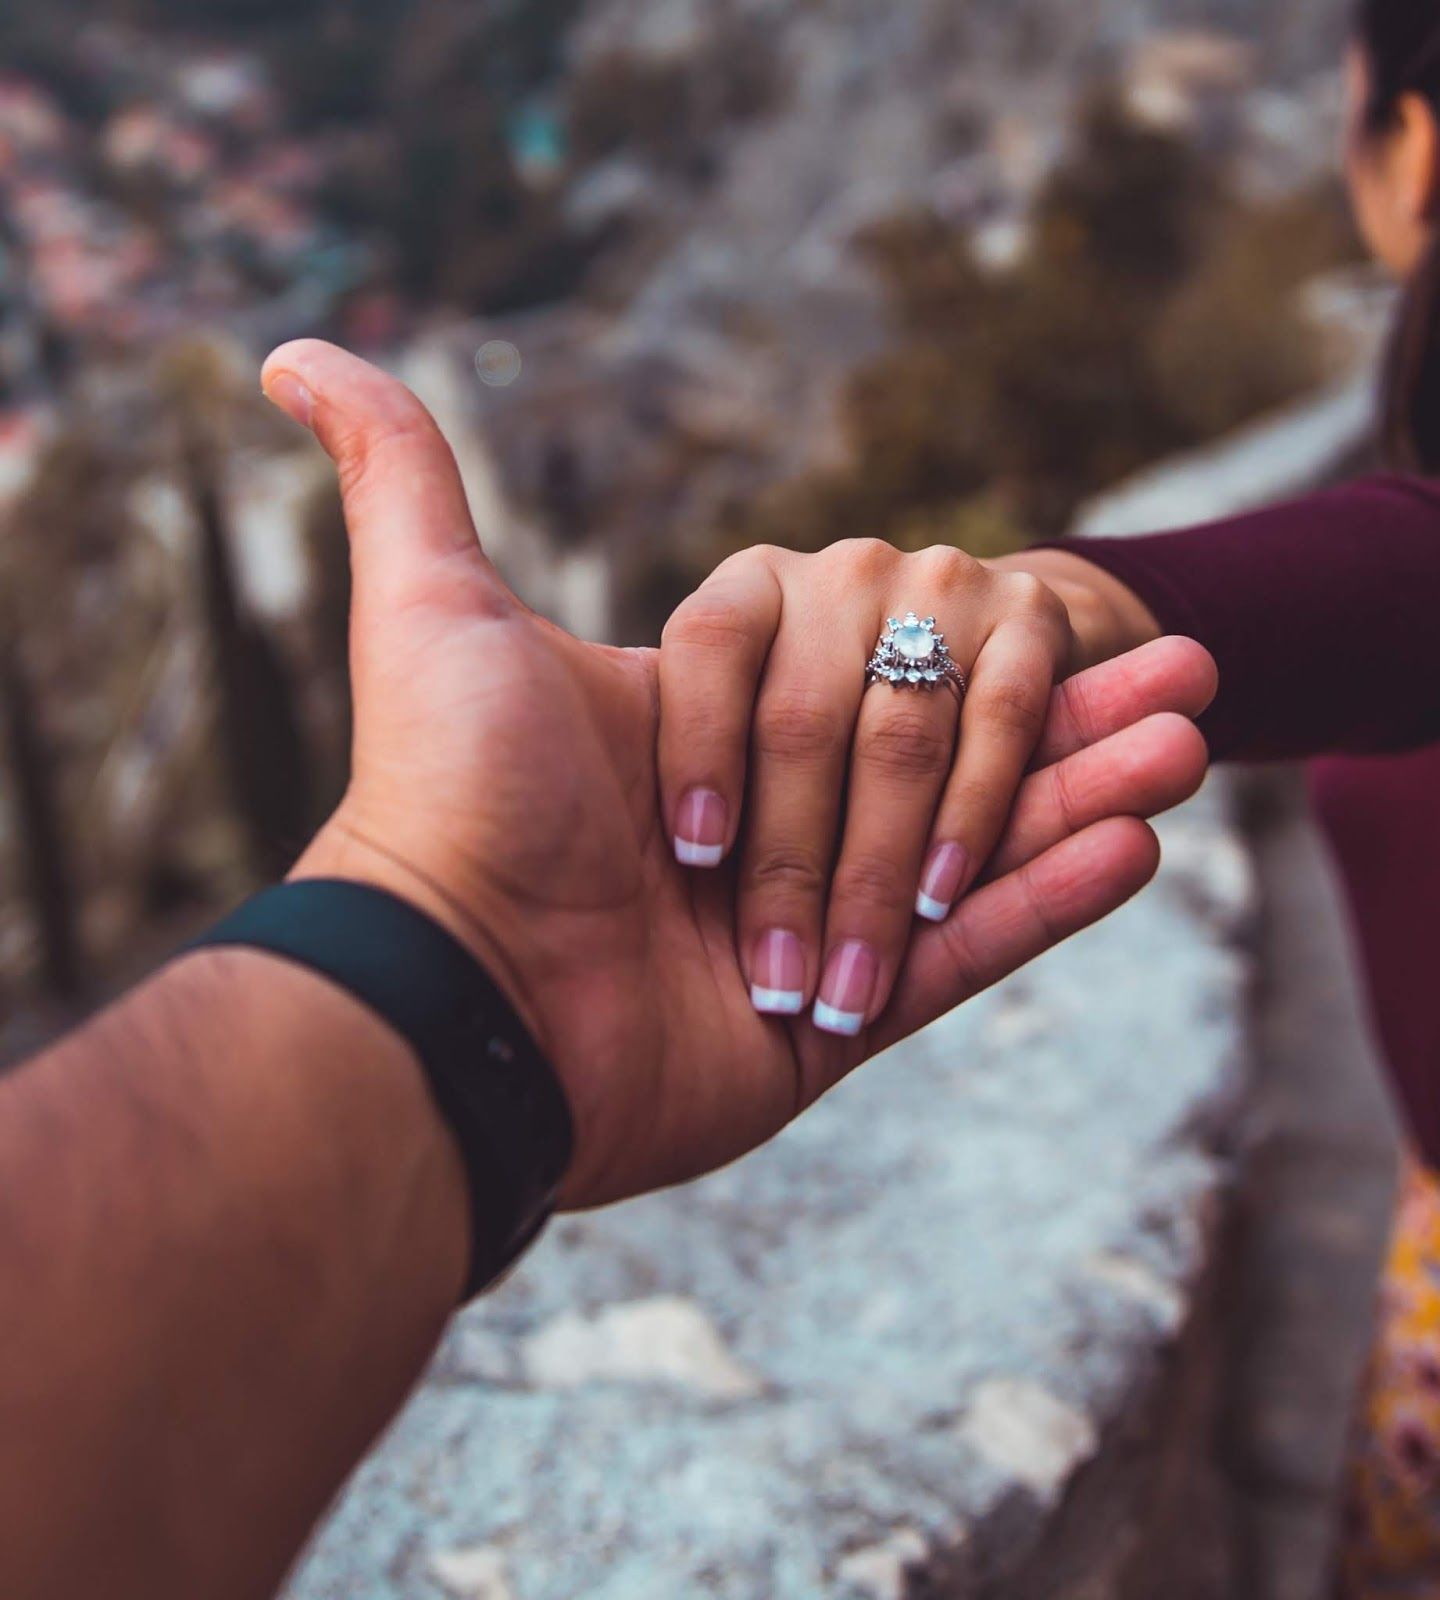 Top 102+ Wallpaper Pictures Of Couples Holding Hands Full HD, 2k, 4k 10 ...